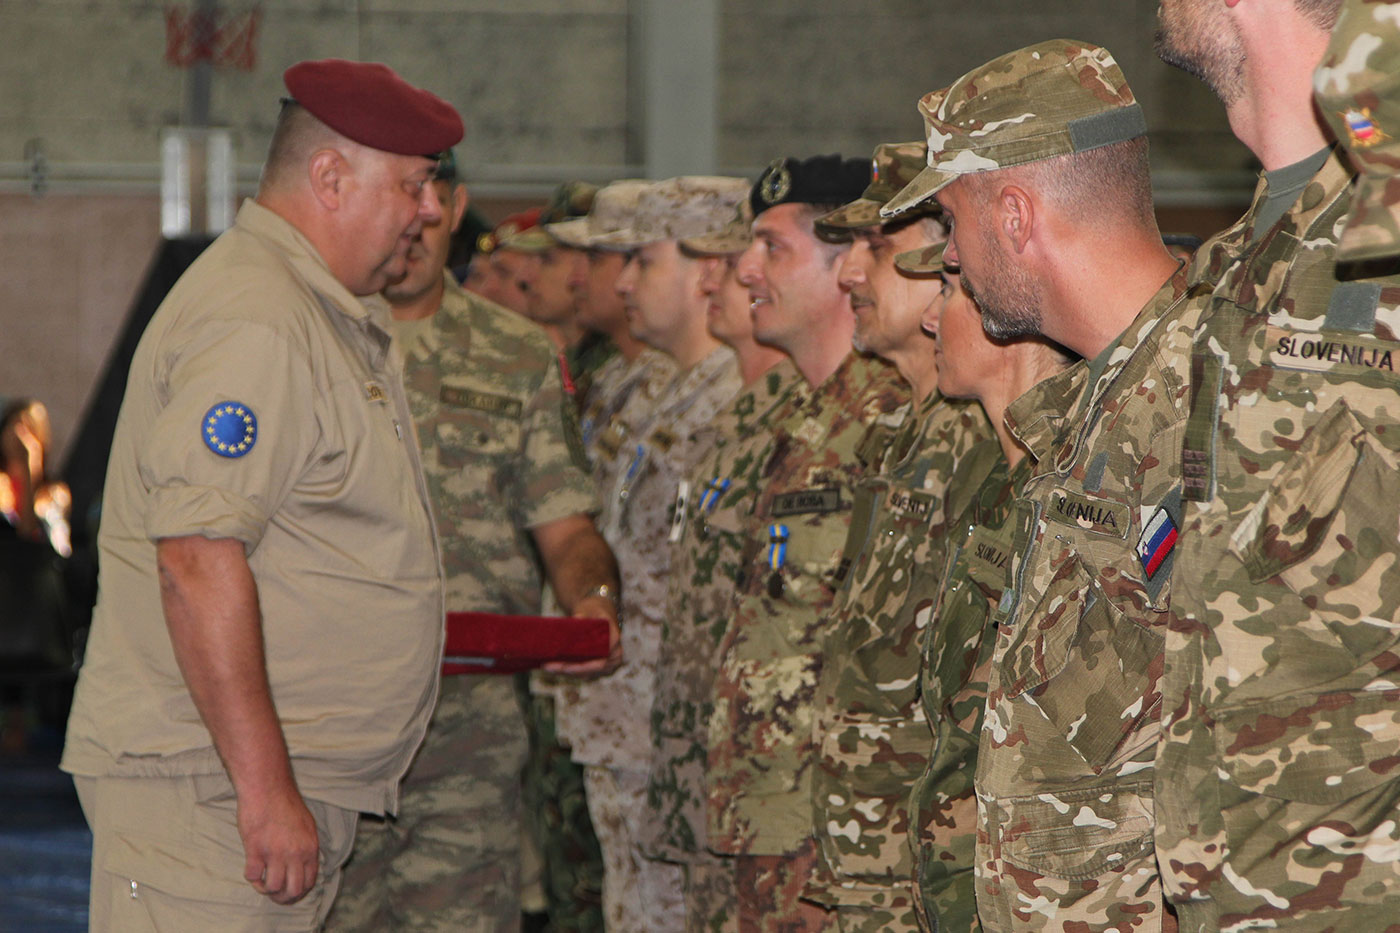 COM EUFOR, Major General Friedrich Schrötter presents the EUFOR Op ALTHEA medal to EUFOR soldiers.